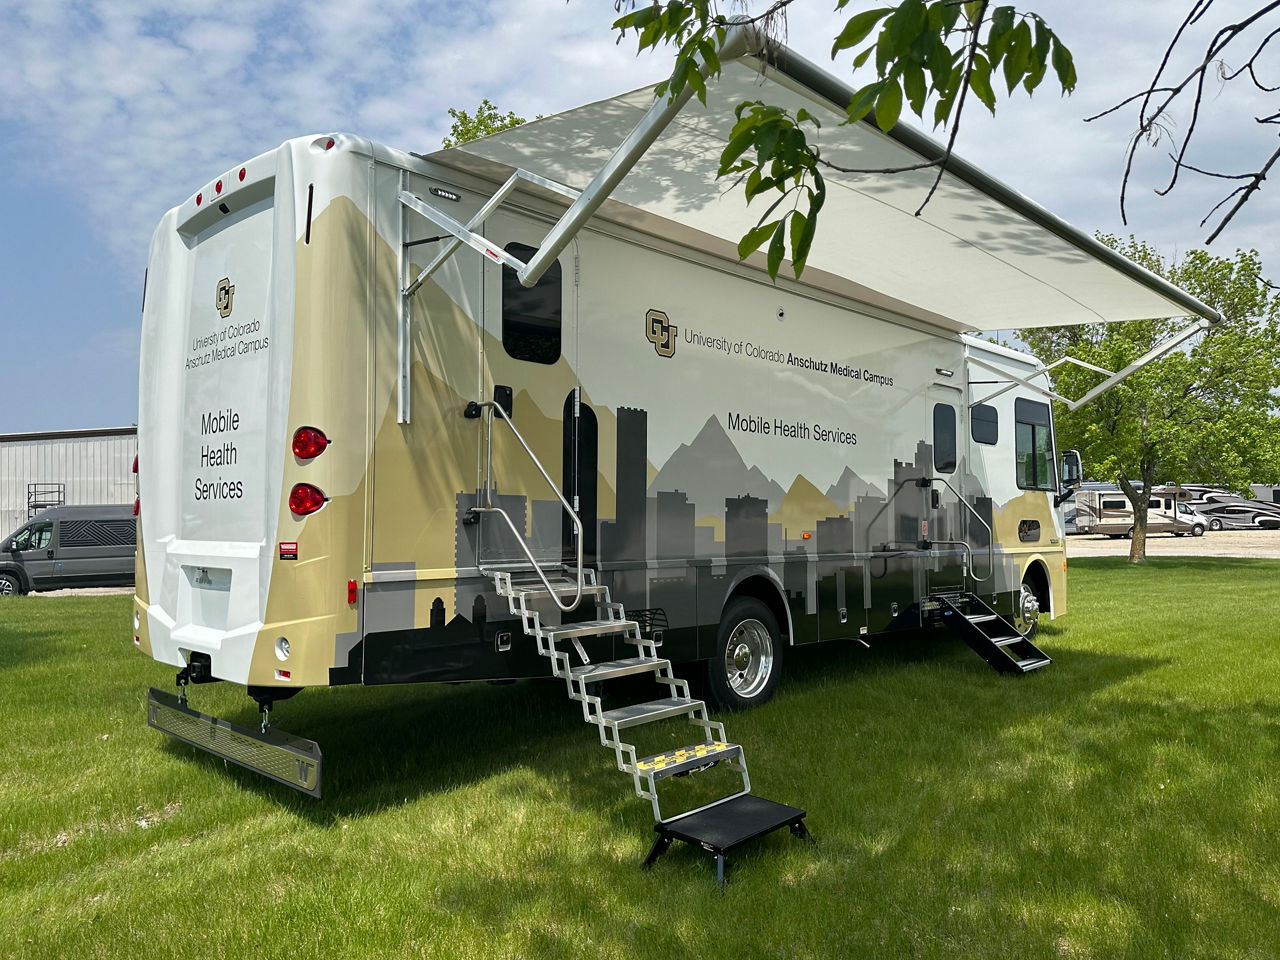 Mobile Health Services specialty vehicle